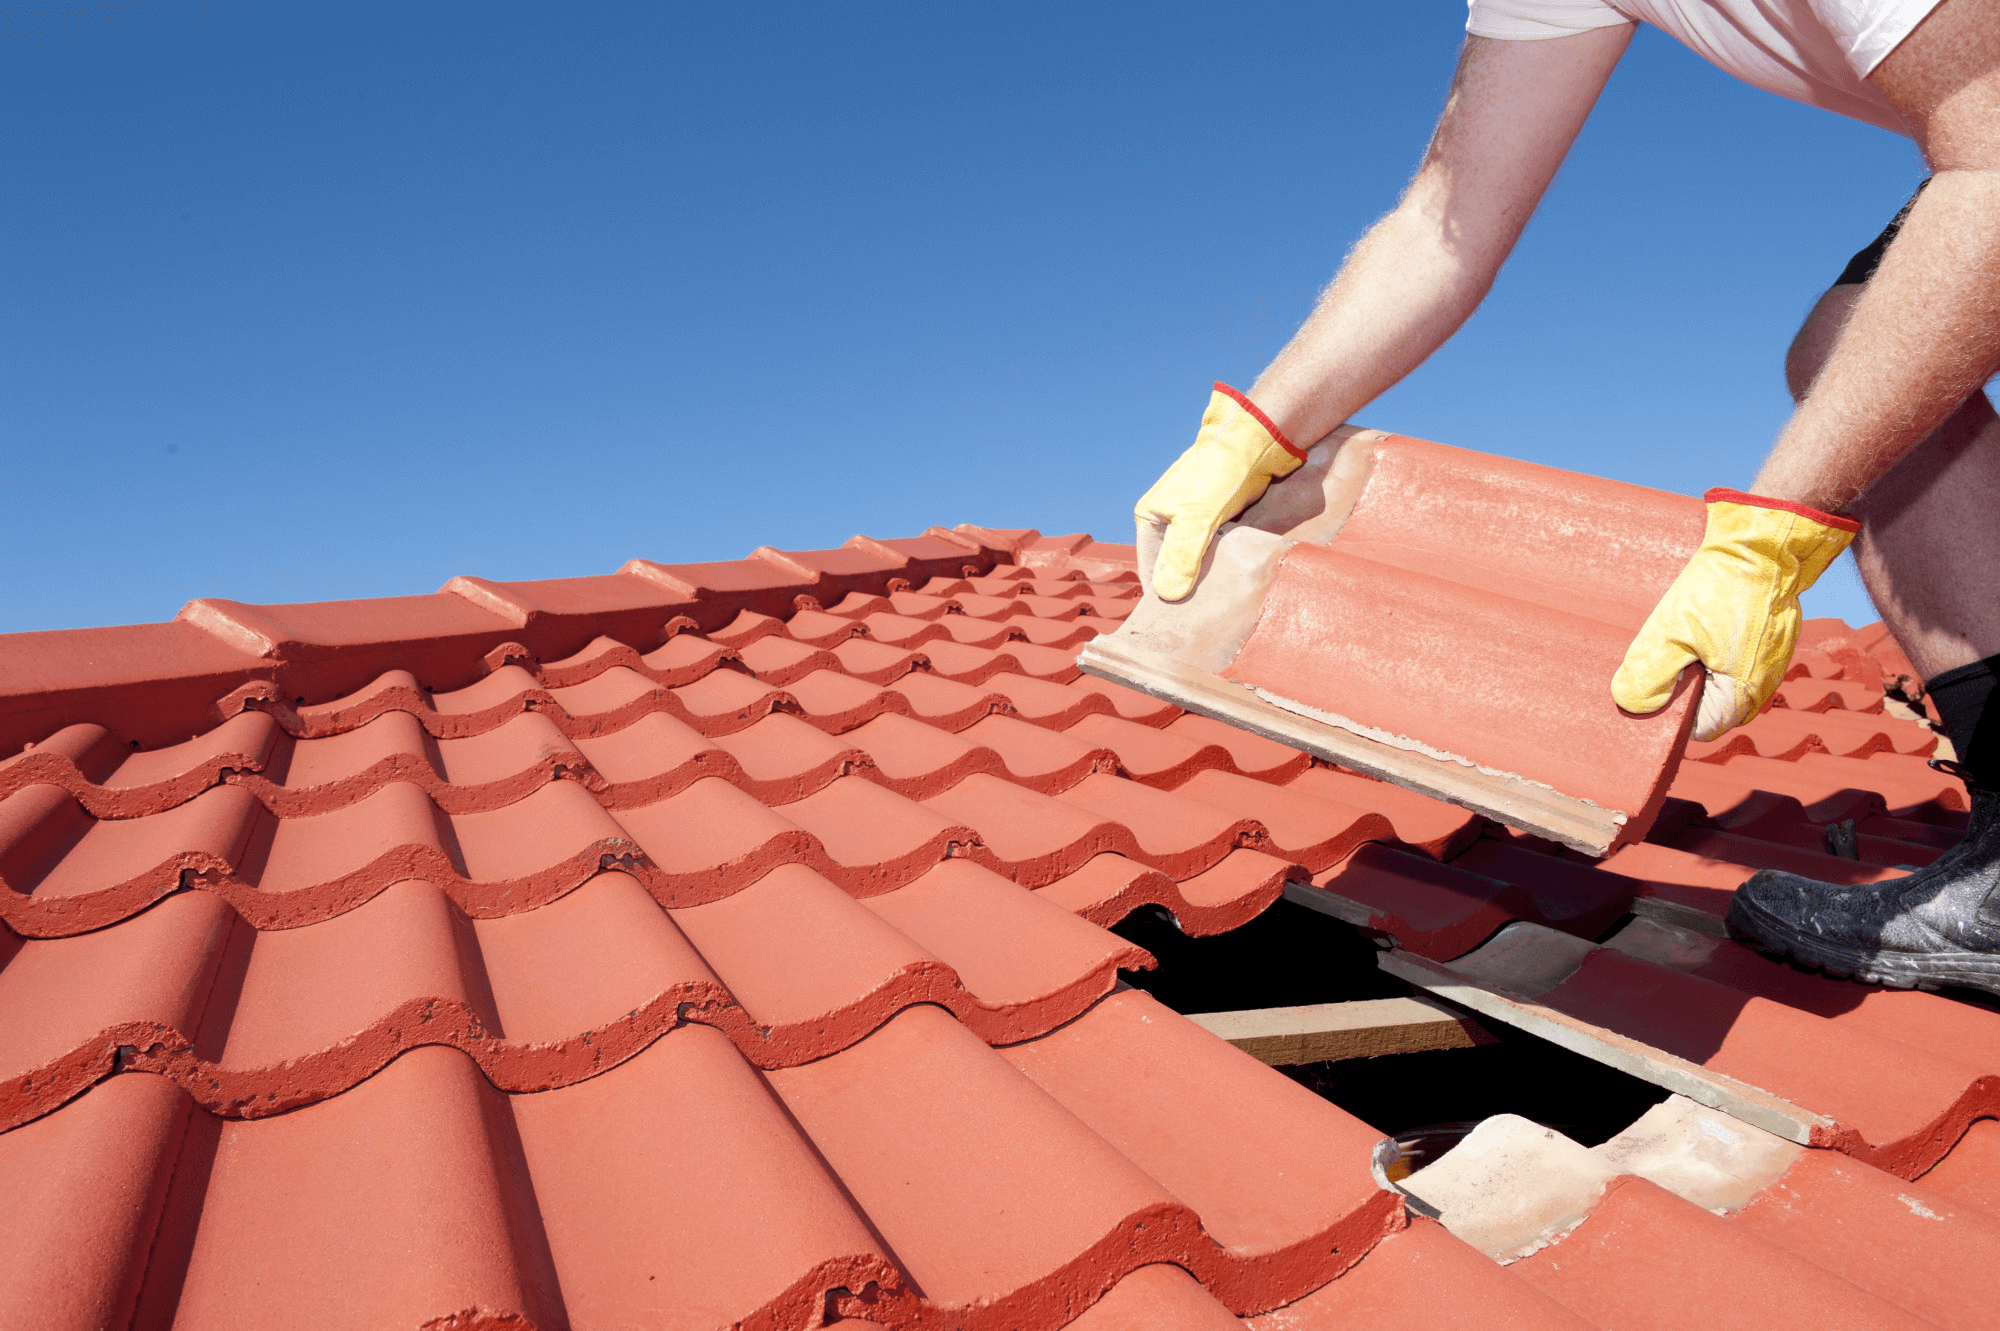  Common Functions of Roofer